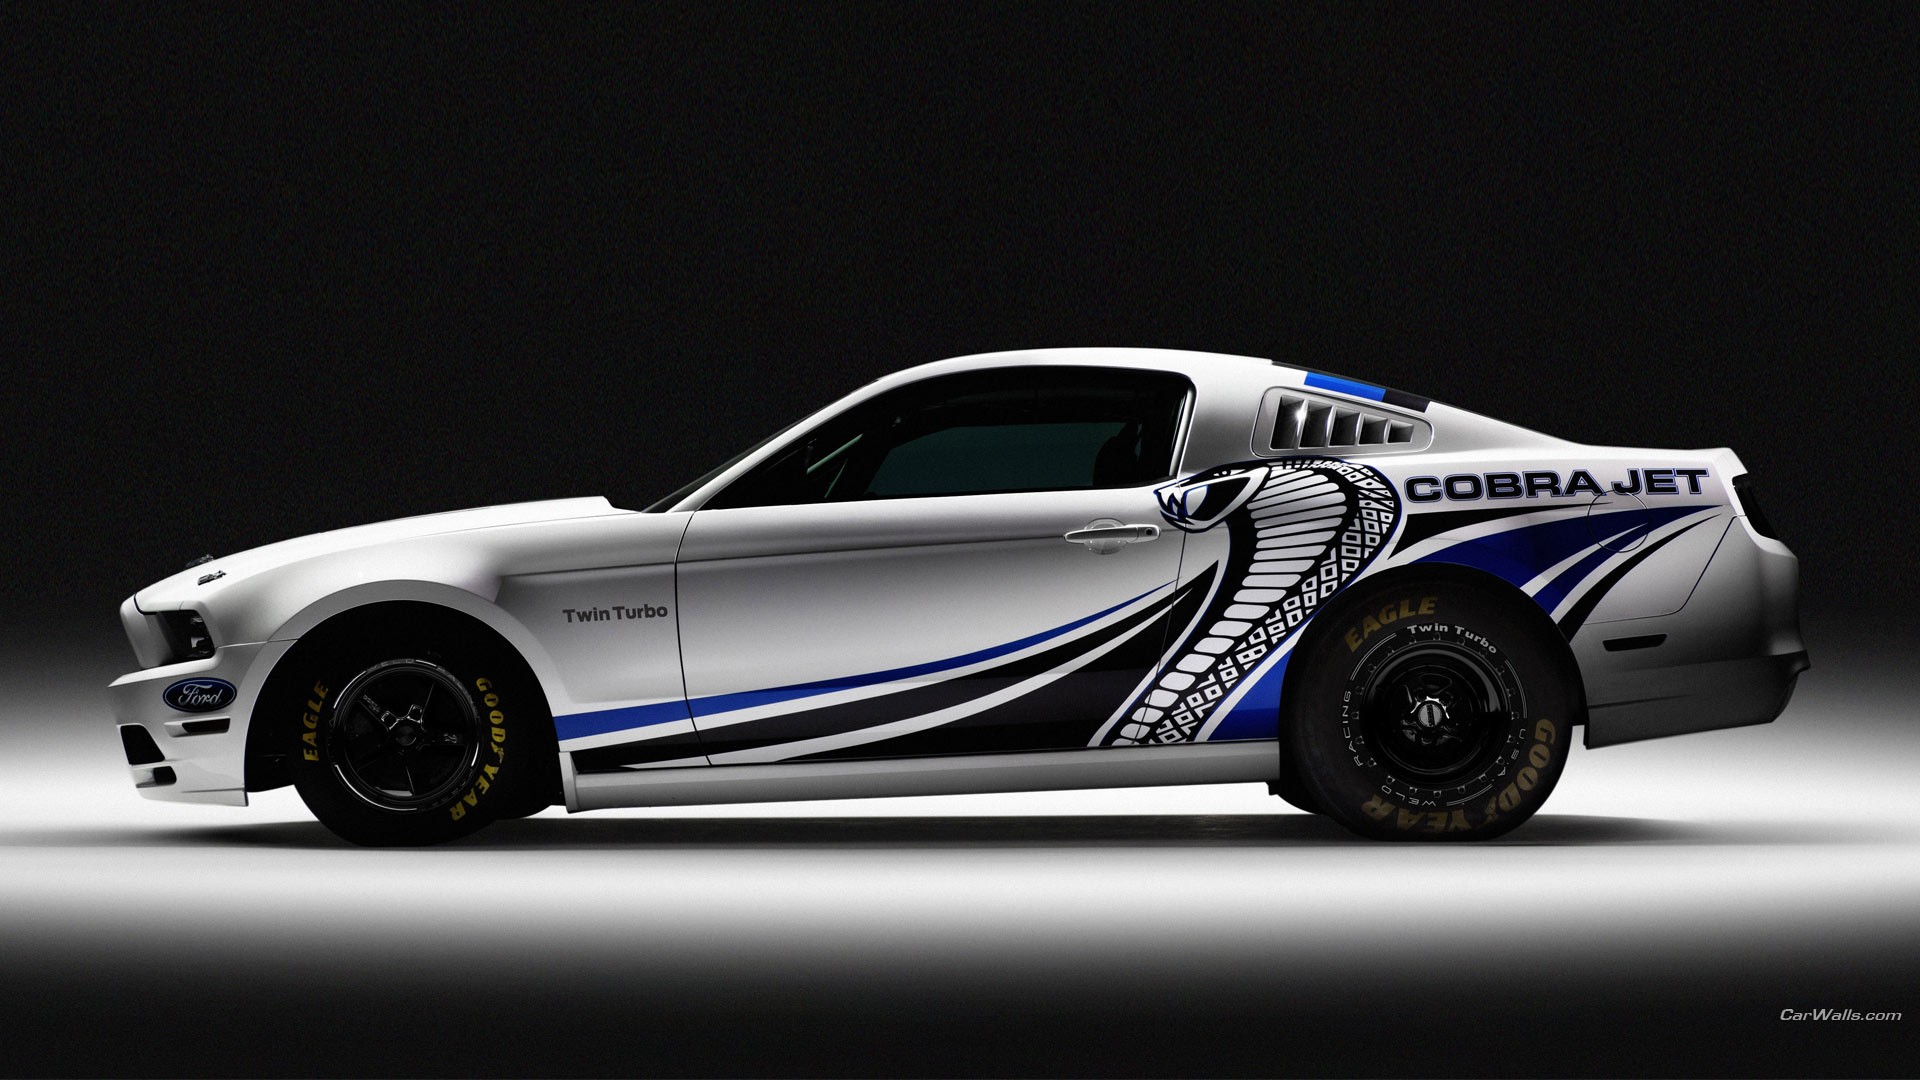 cars, Concept, Cars, Ford, Mustang, Shelby, Mustang, Twin, Turbo, Tuned, Ford, Mustang, Cobra, Jets, Cobra, Jet Wallpaper